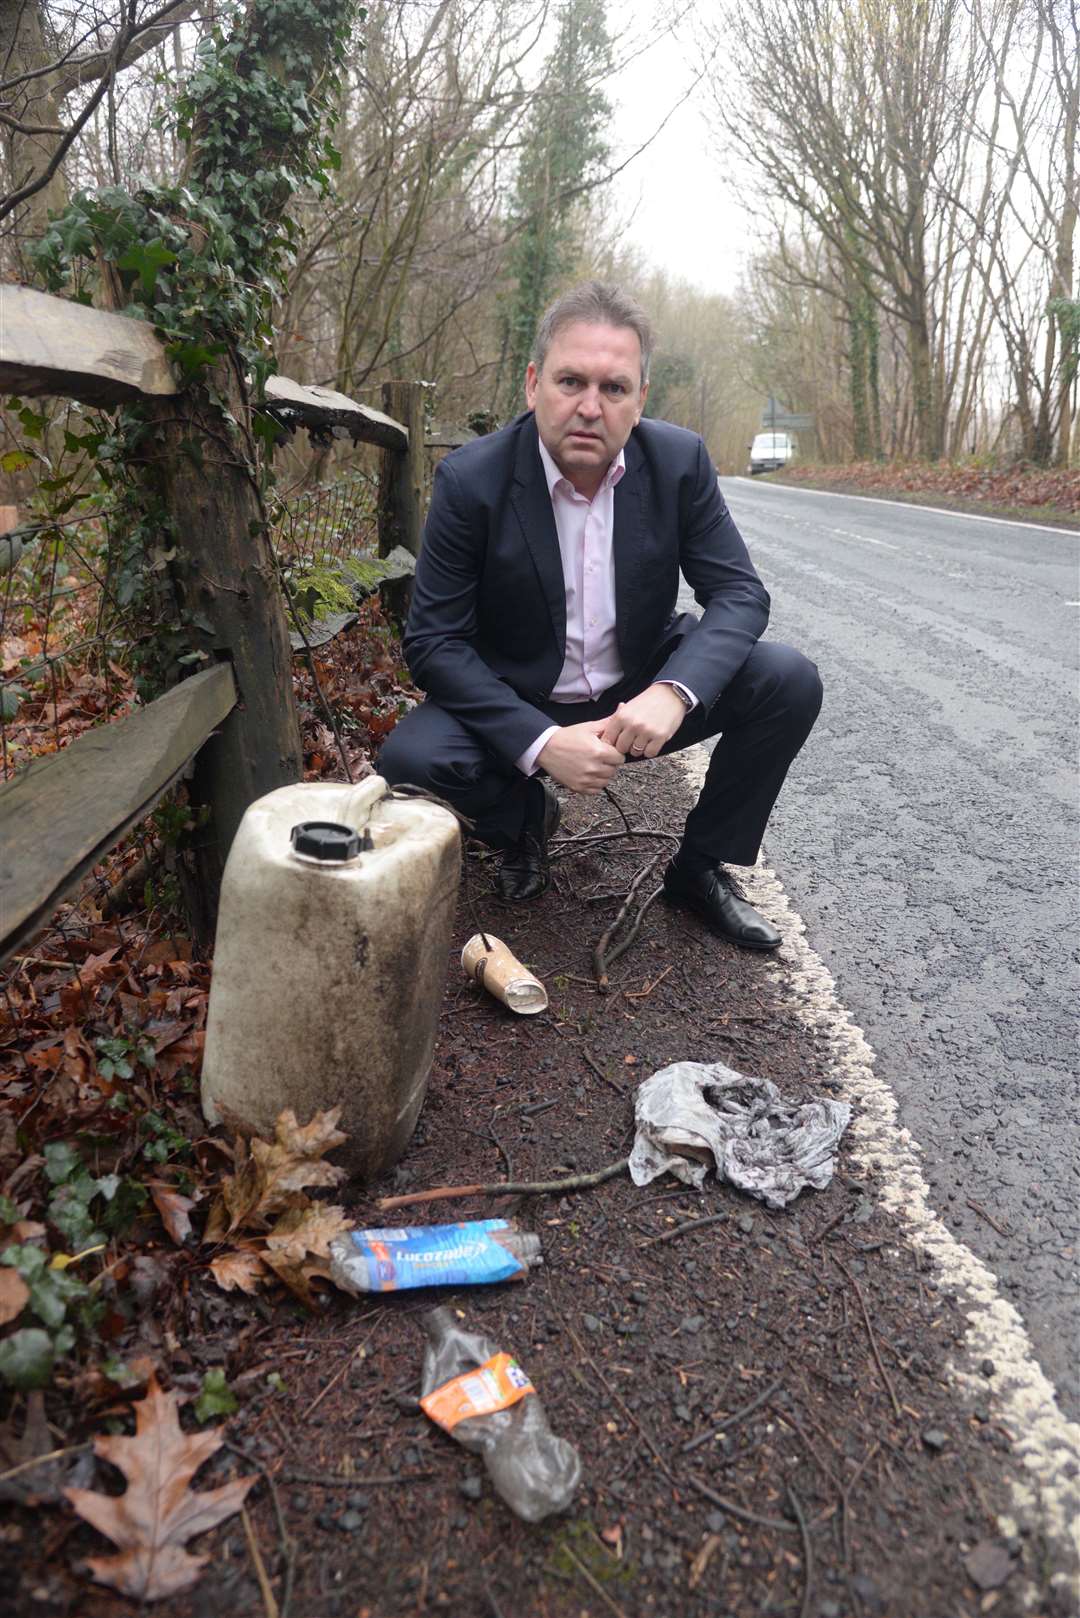 Danny Lucas is fed up with the amount of litter